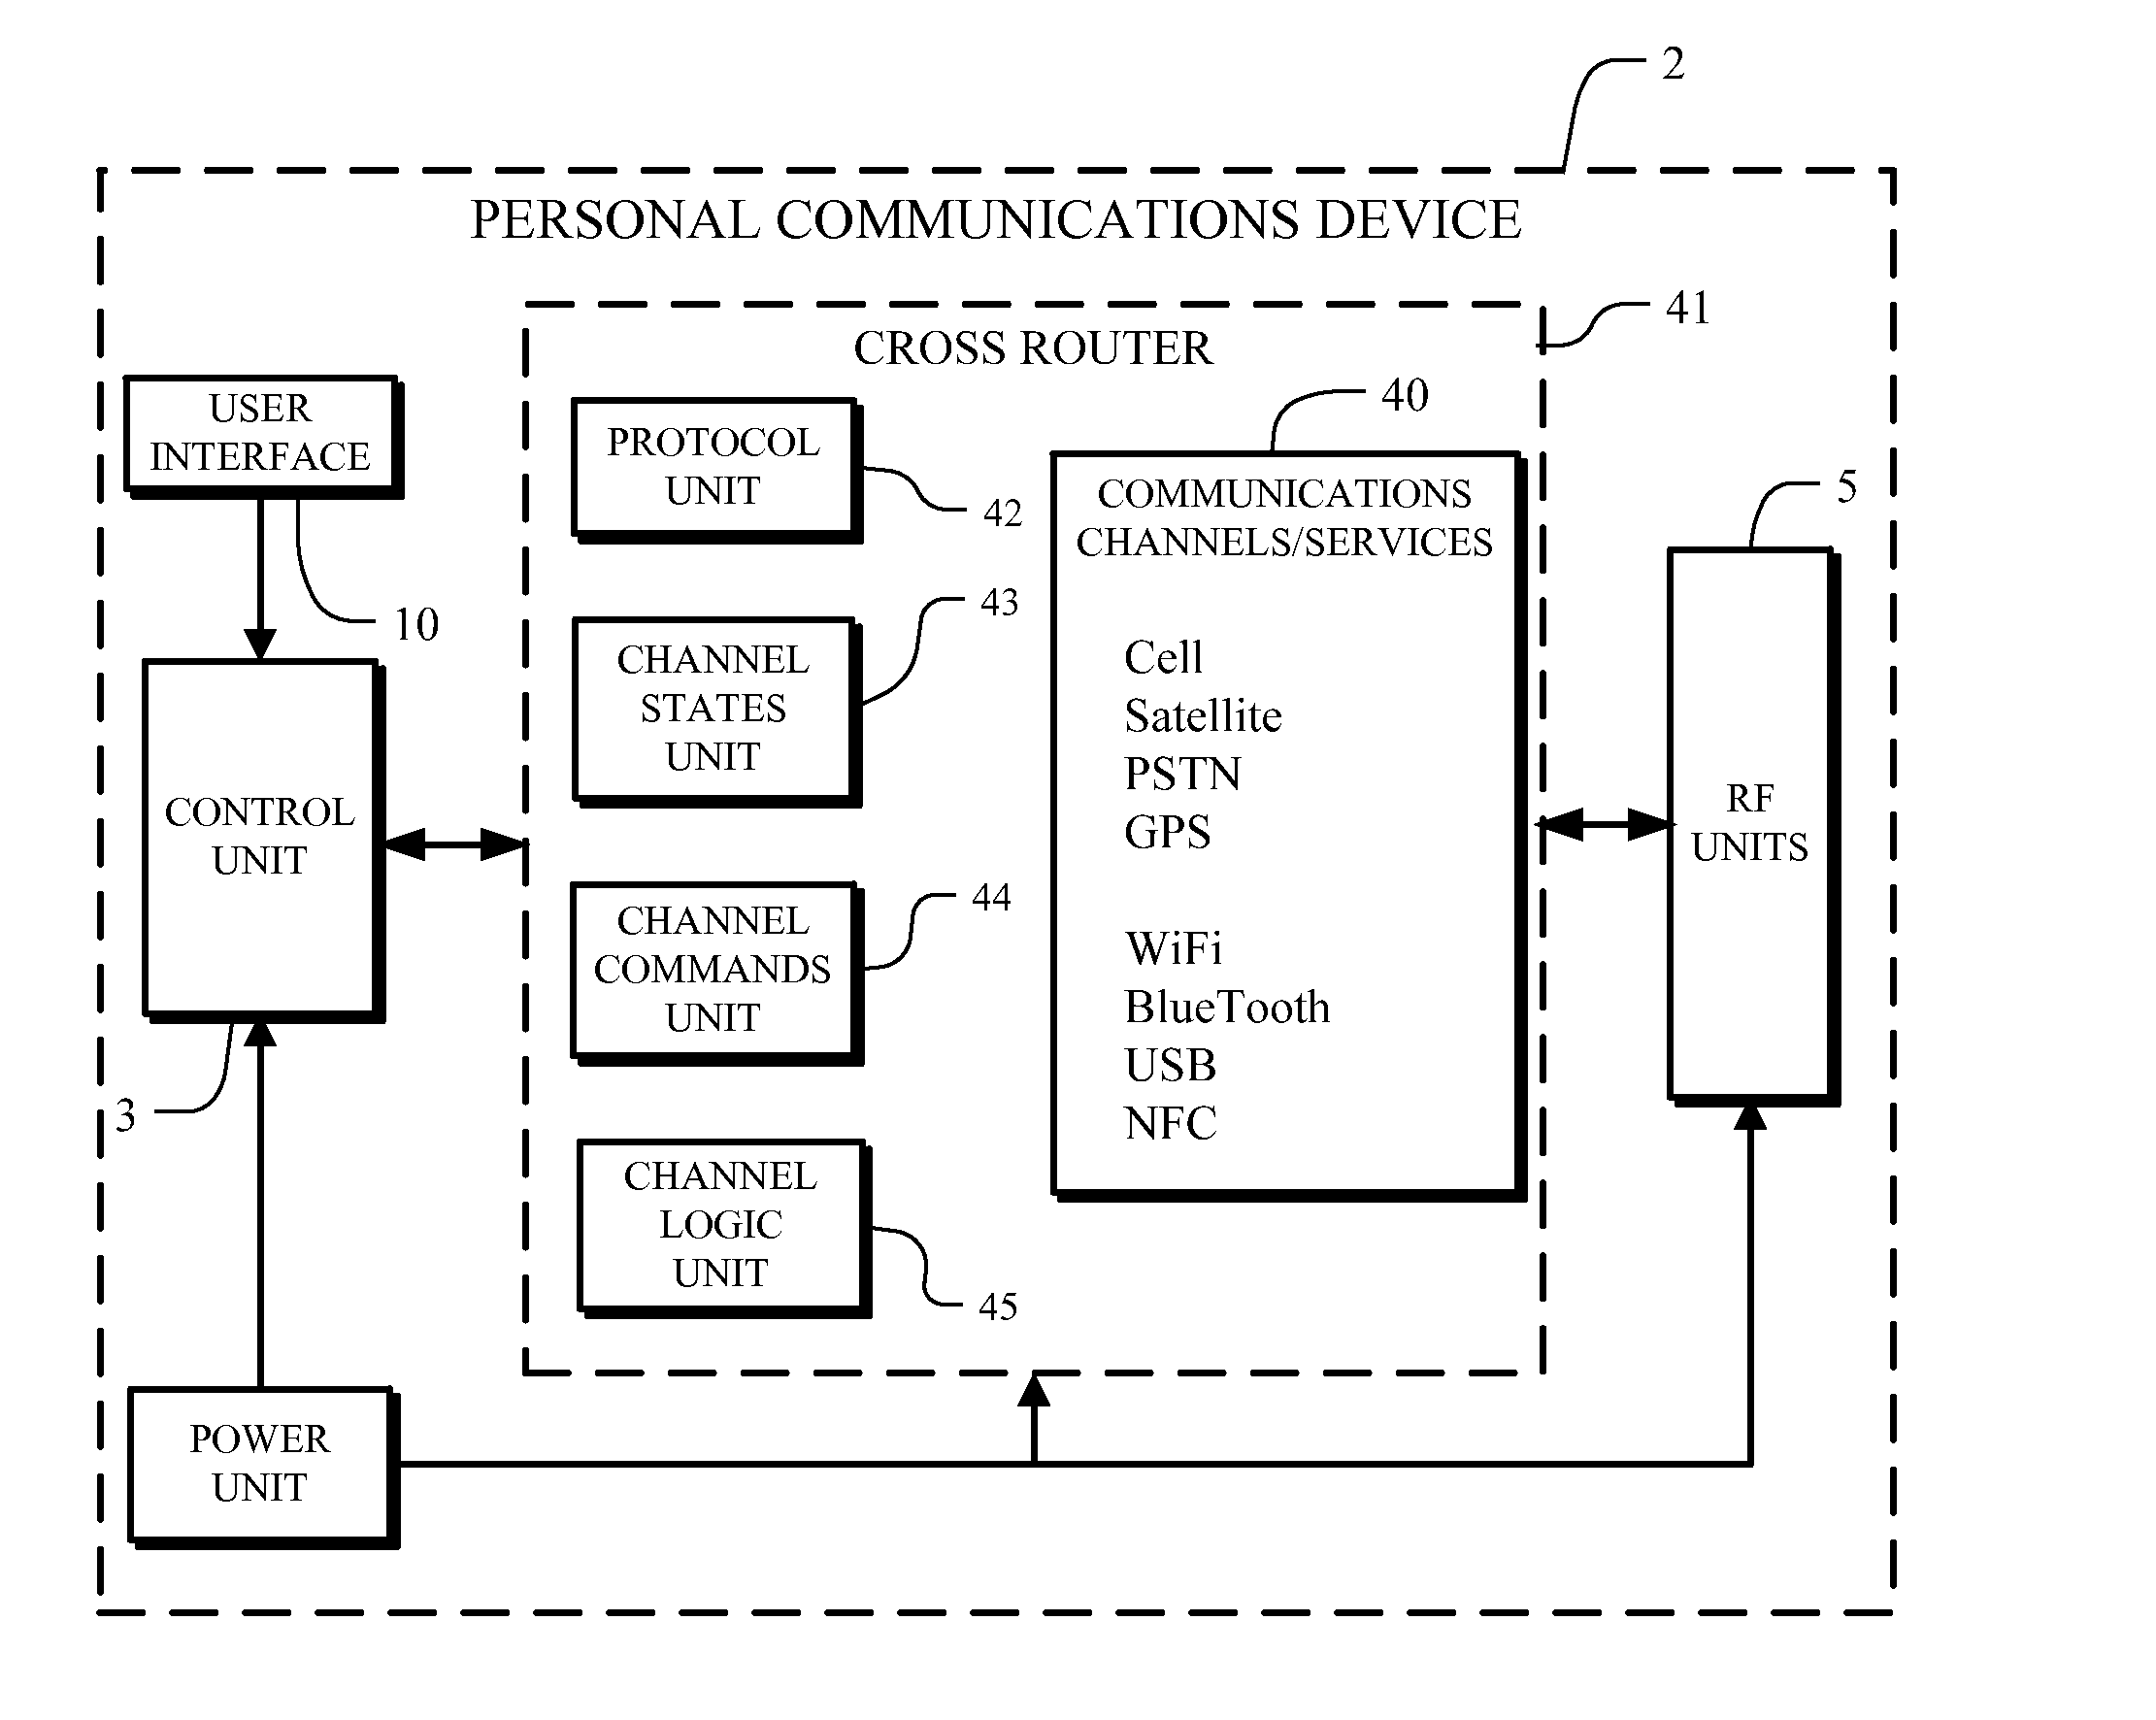 Personal communications device with cross router